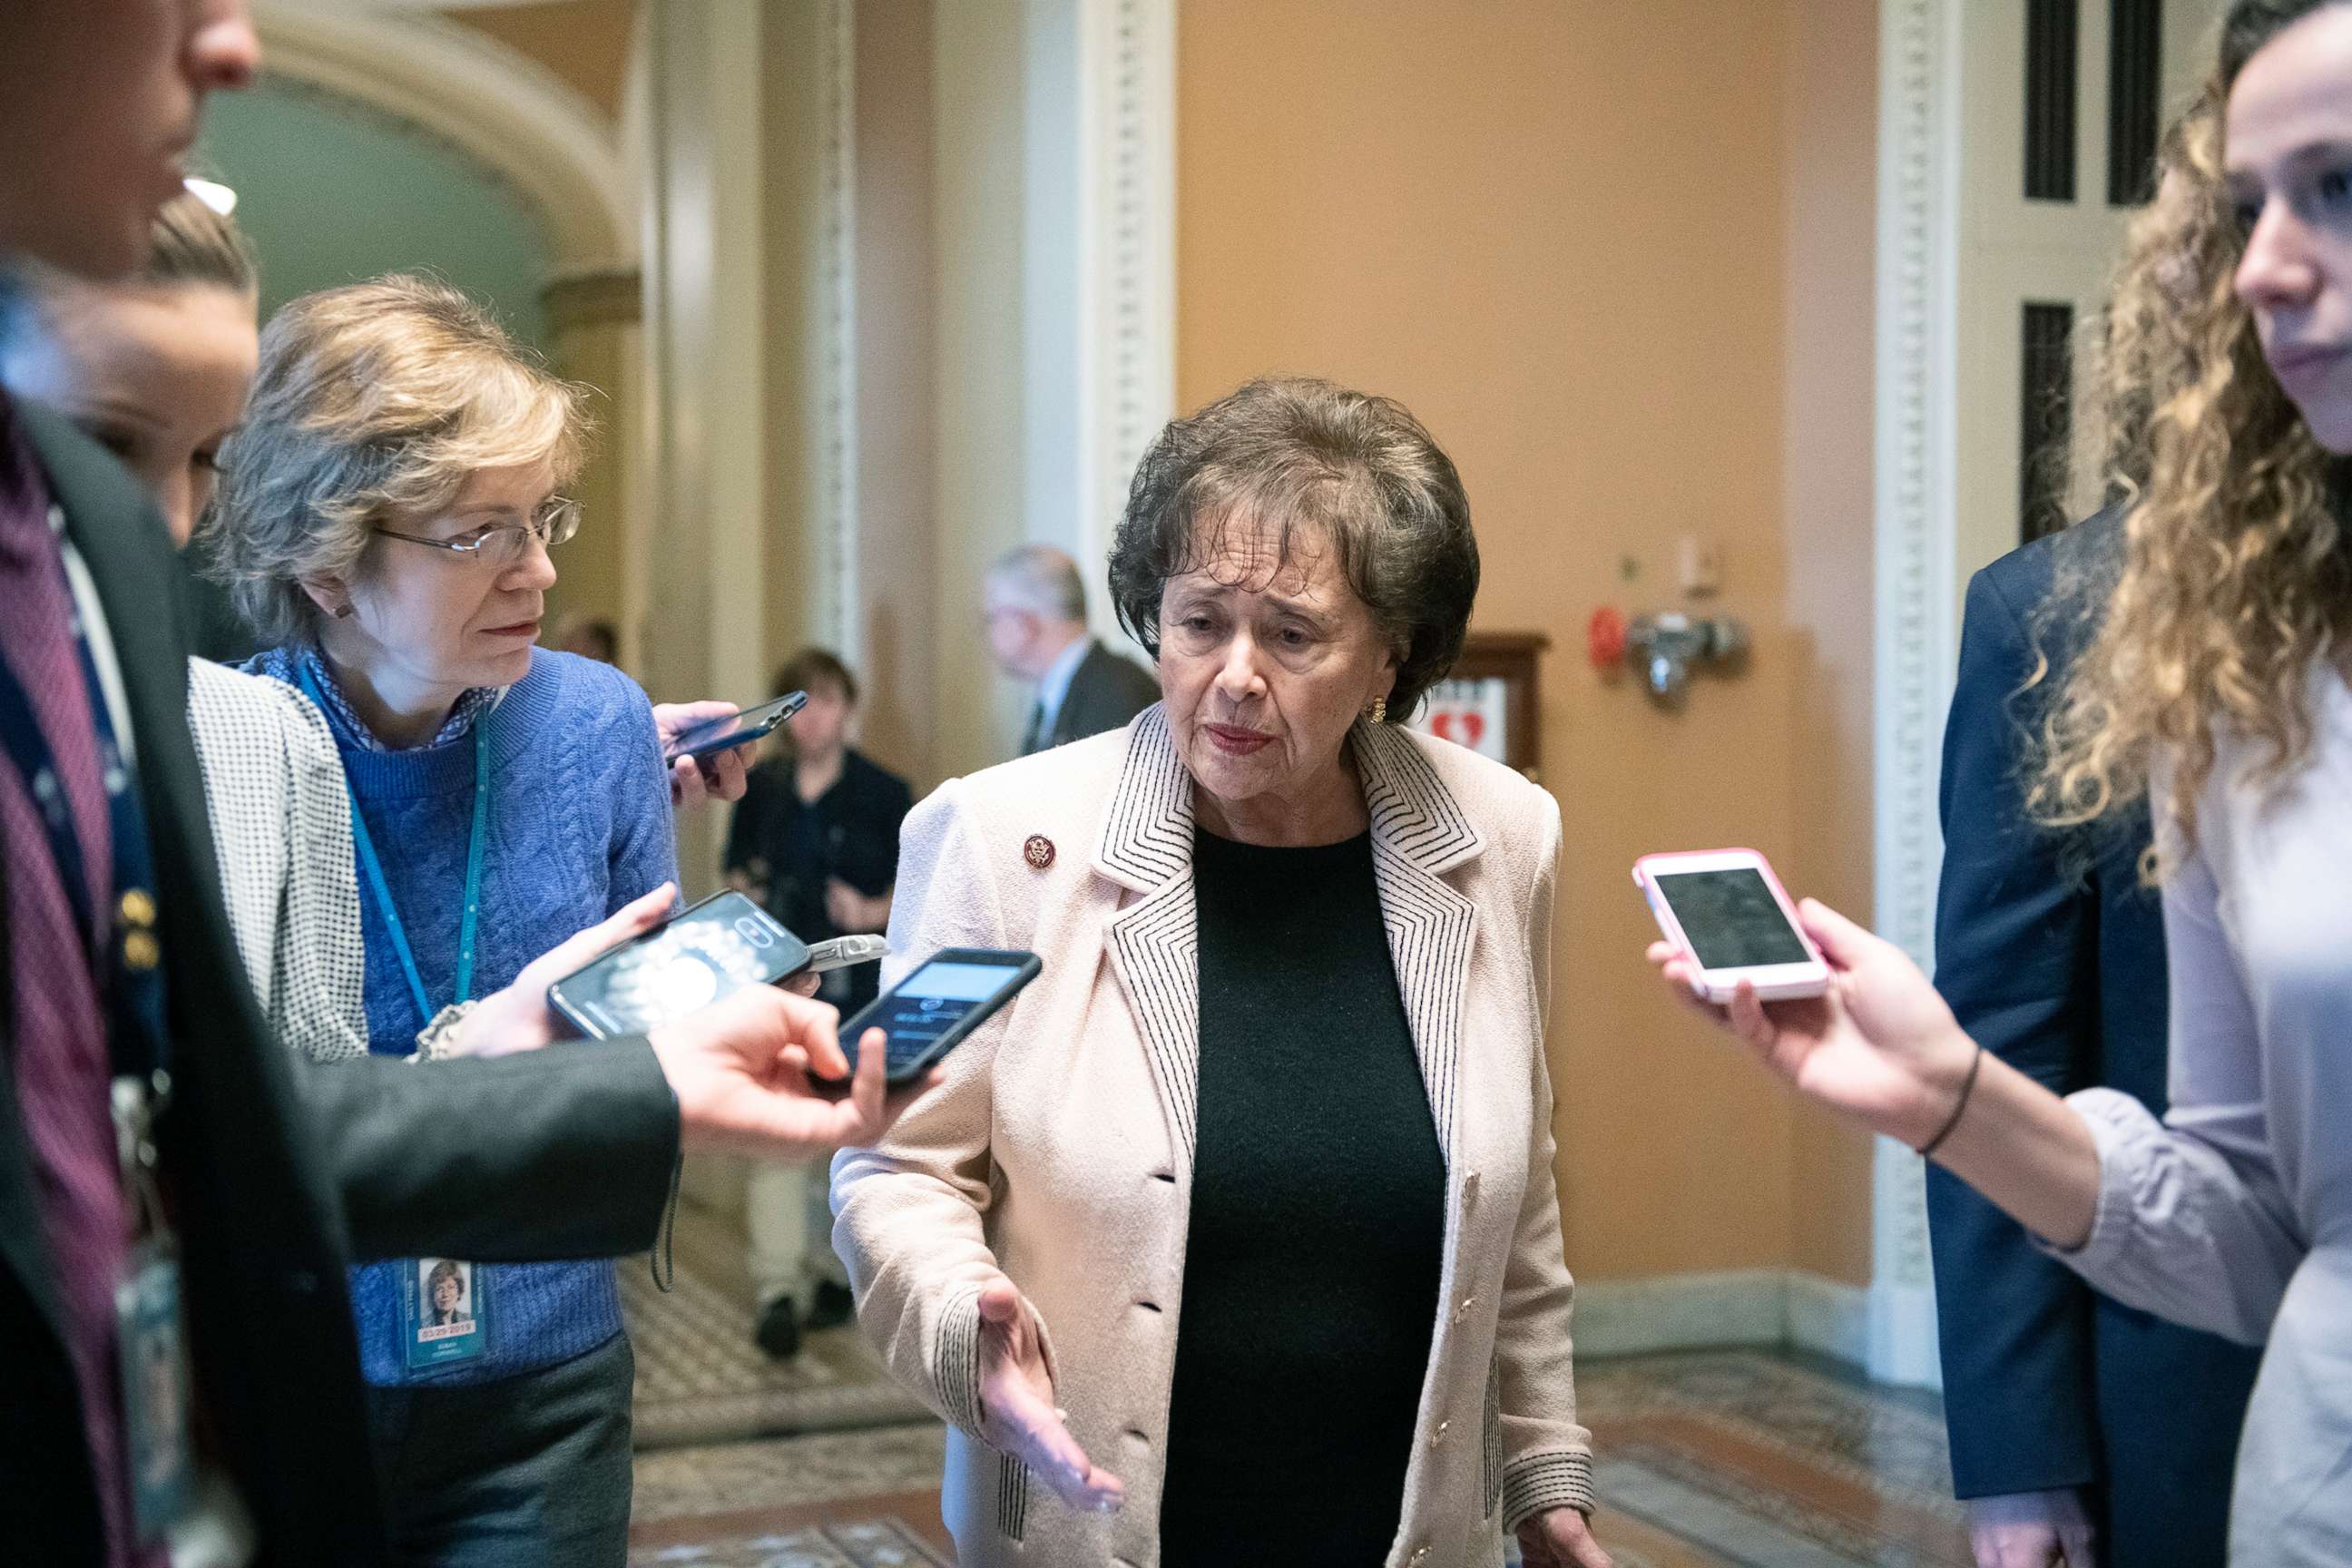 PHOTO: Rep. Nita Lowey answers reporter's questions as she departs the Senate Chamber at the US Capitol in Washington, DC, Jan. 24, 2019.